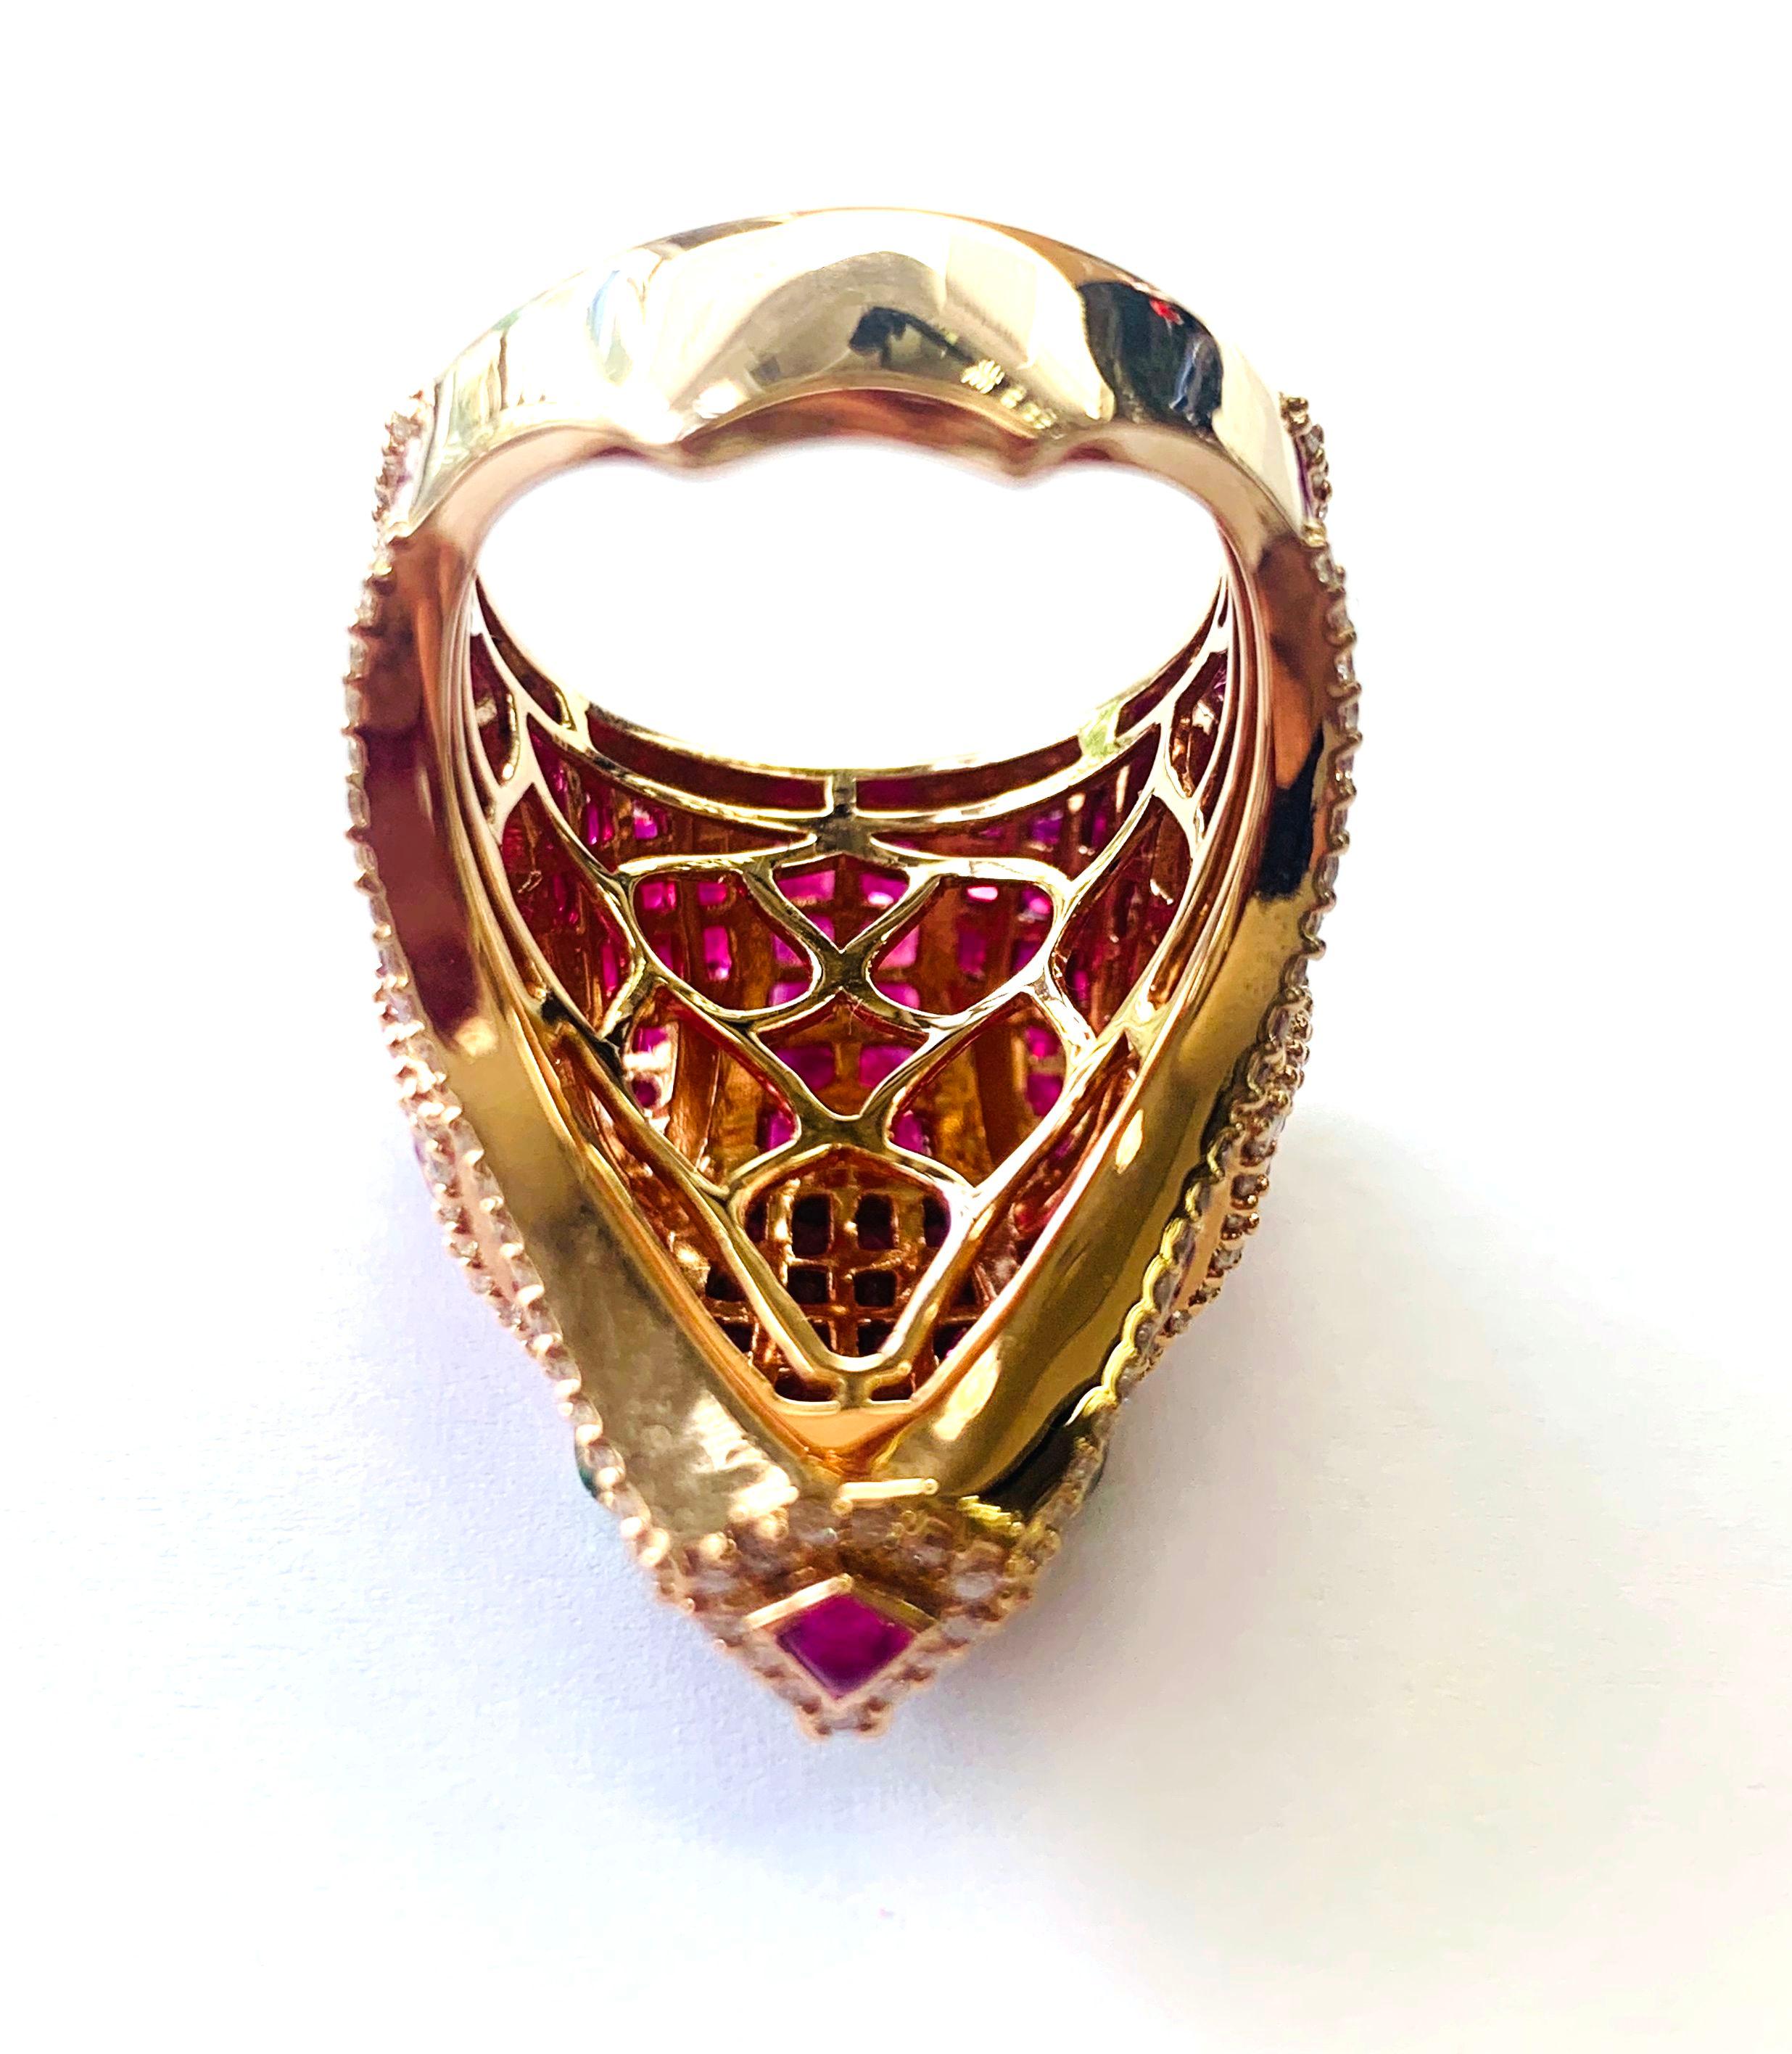 A bear made of matching square-shaped 44.29-carat rubies paved on 18k gold and palladium from its rounded nose to its pointy ears is further highlighted by rows of 1.23-carat diamonds. Its green glowing eyes are made of two 0.28-carat tsavorites.